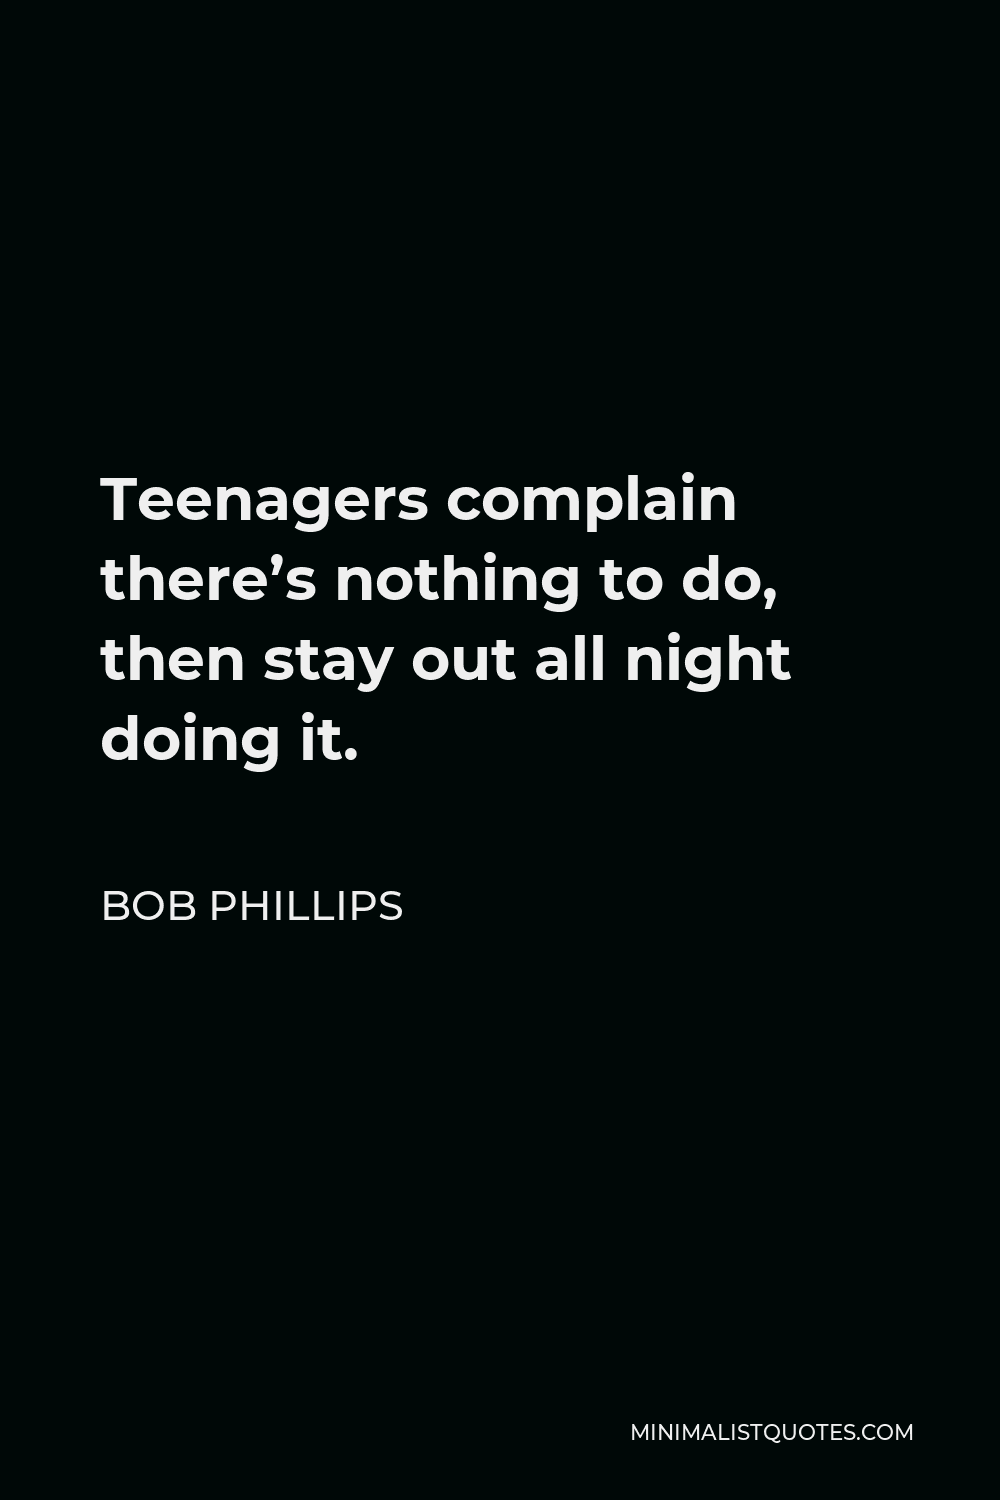 Bob Phillips Quote - Teenagers complain there’s nothing to do, then stay out all night doing it.